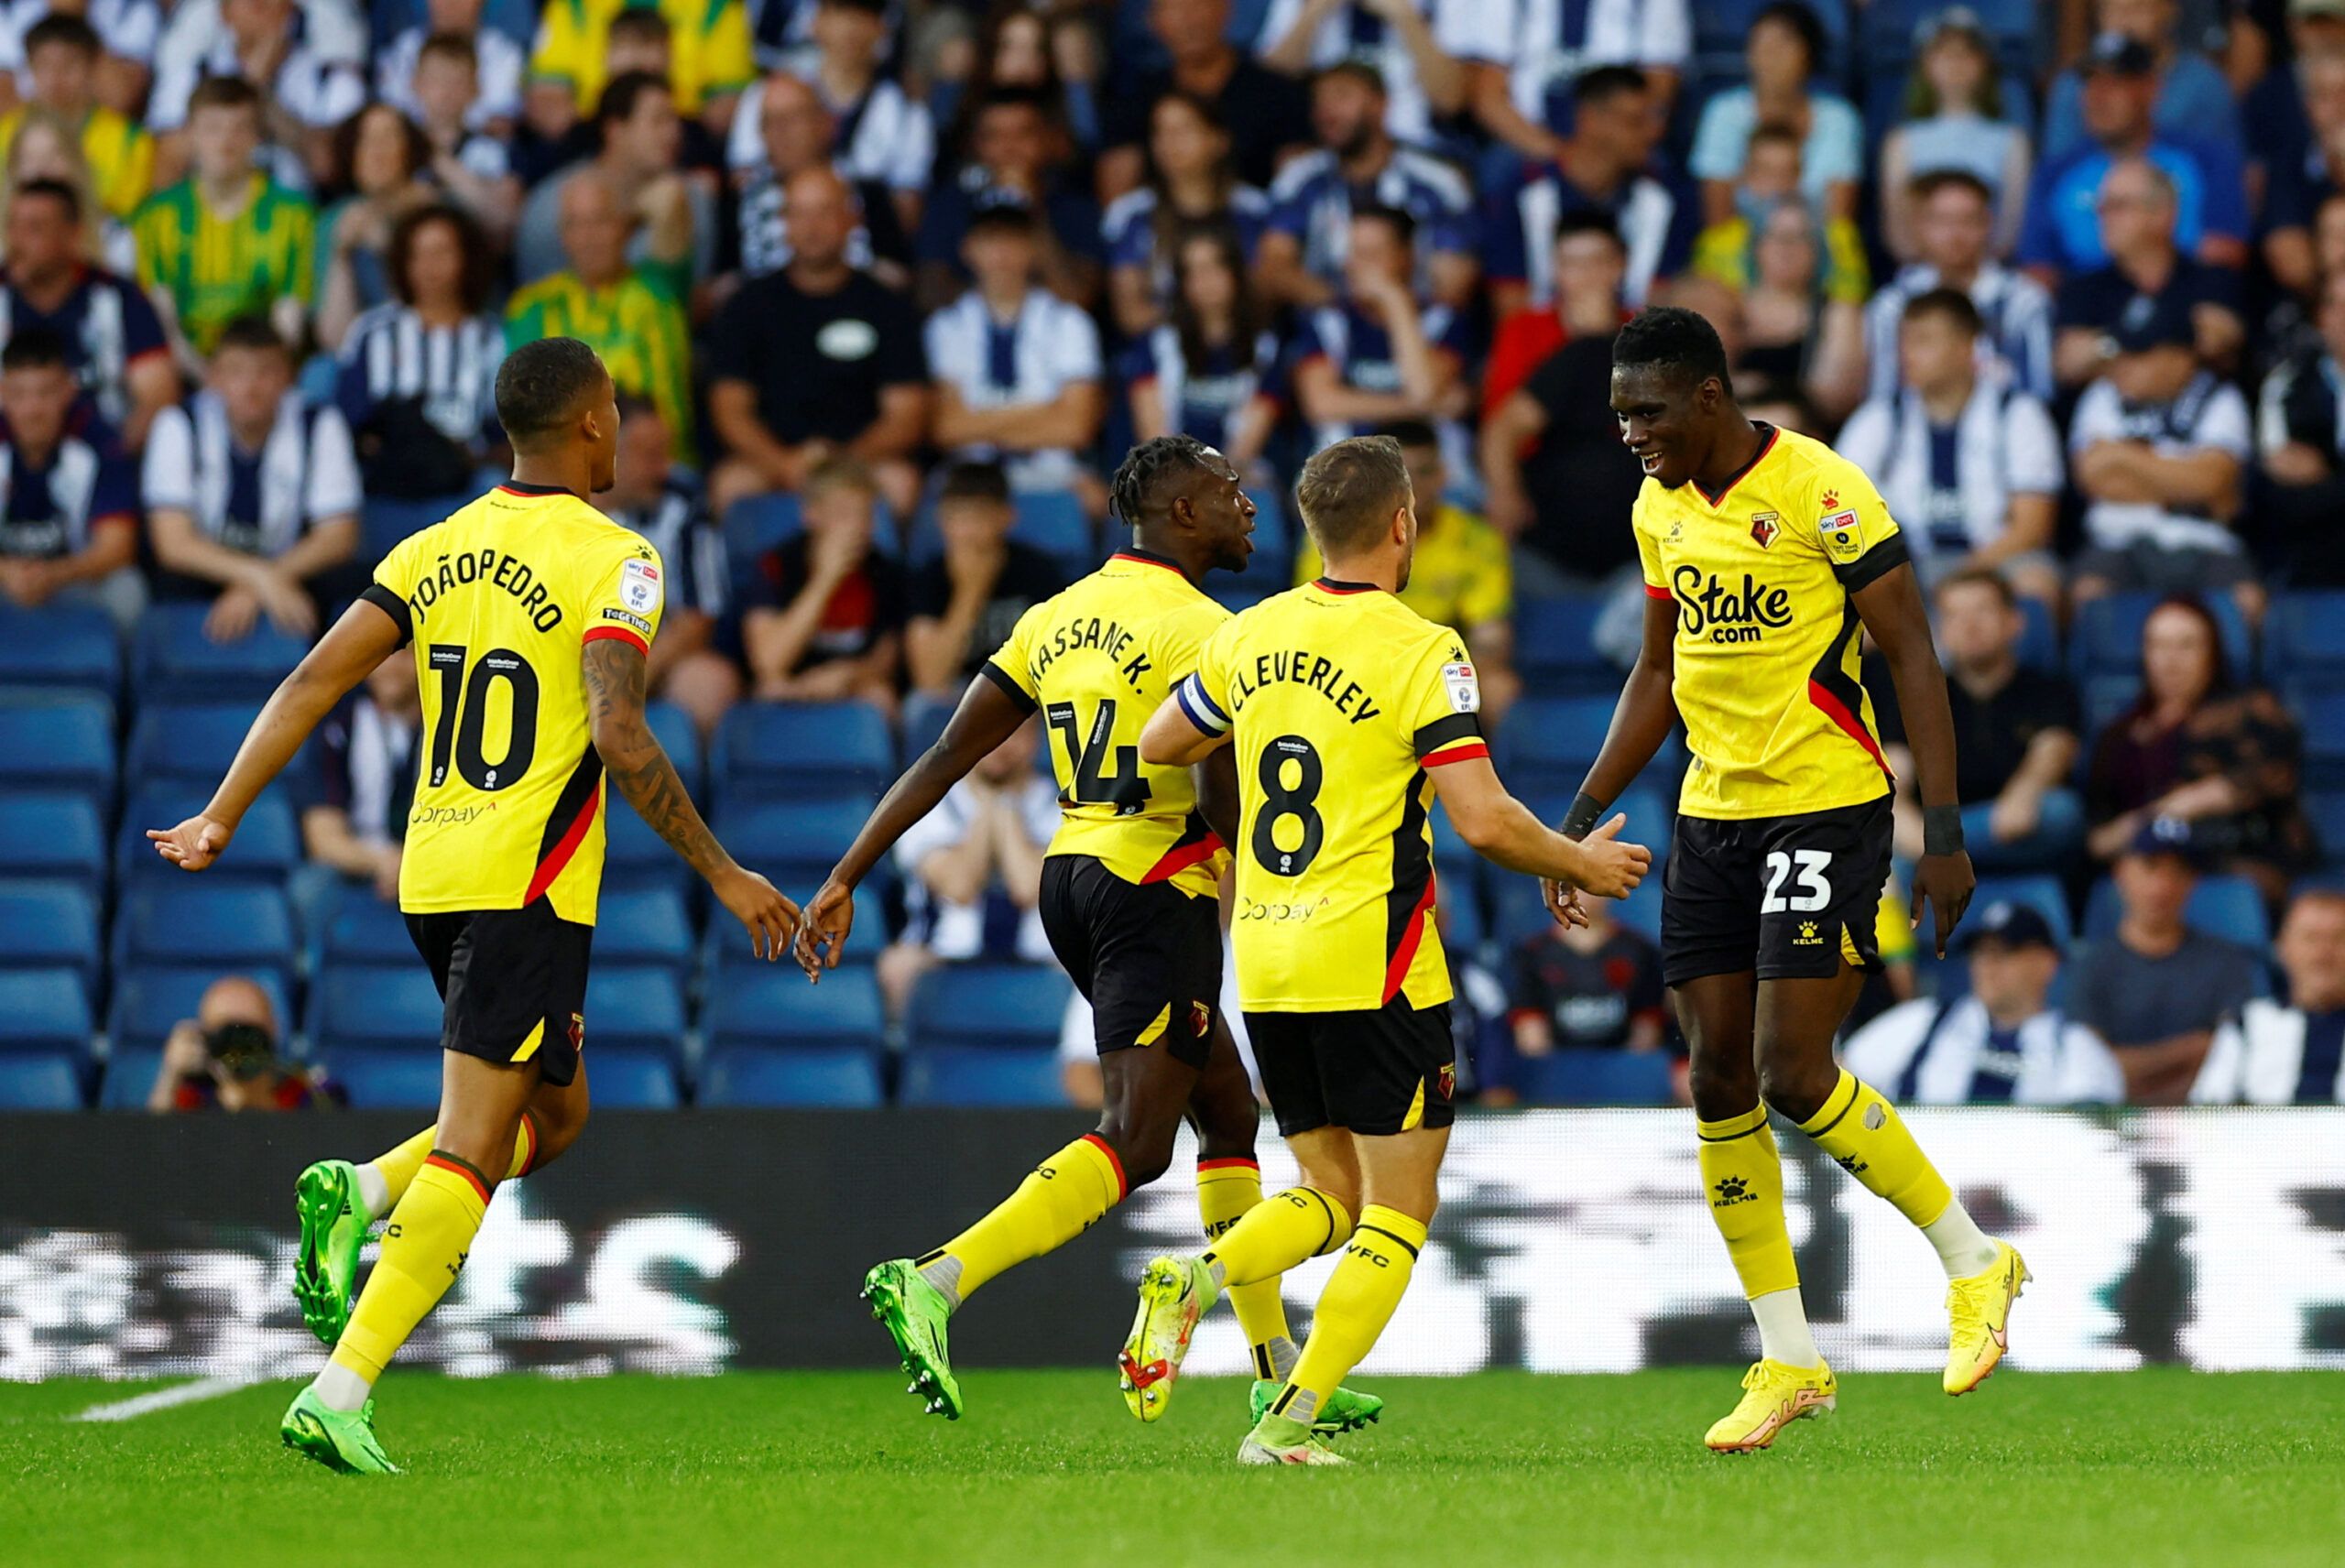 Soccer Football - Championship - West Bromwich Albion v Watford - The Hawthorns, West Bromwich, Britain - August 8, 2022  Watford's Ismaila Sarr celebrates after scoring their first goal with teammates  Action Images/Andrew Boyers  EDITORIAL USE ONLY. No use with unauthorized audio, video, data, fixture lists, club/league logos or 